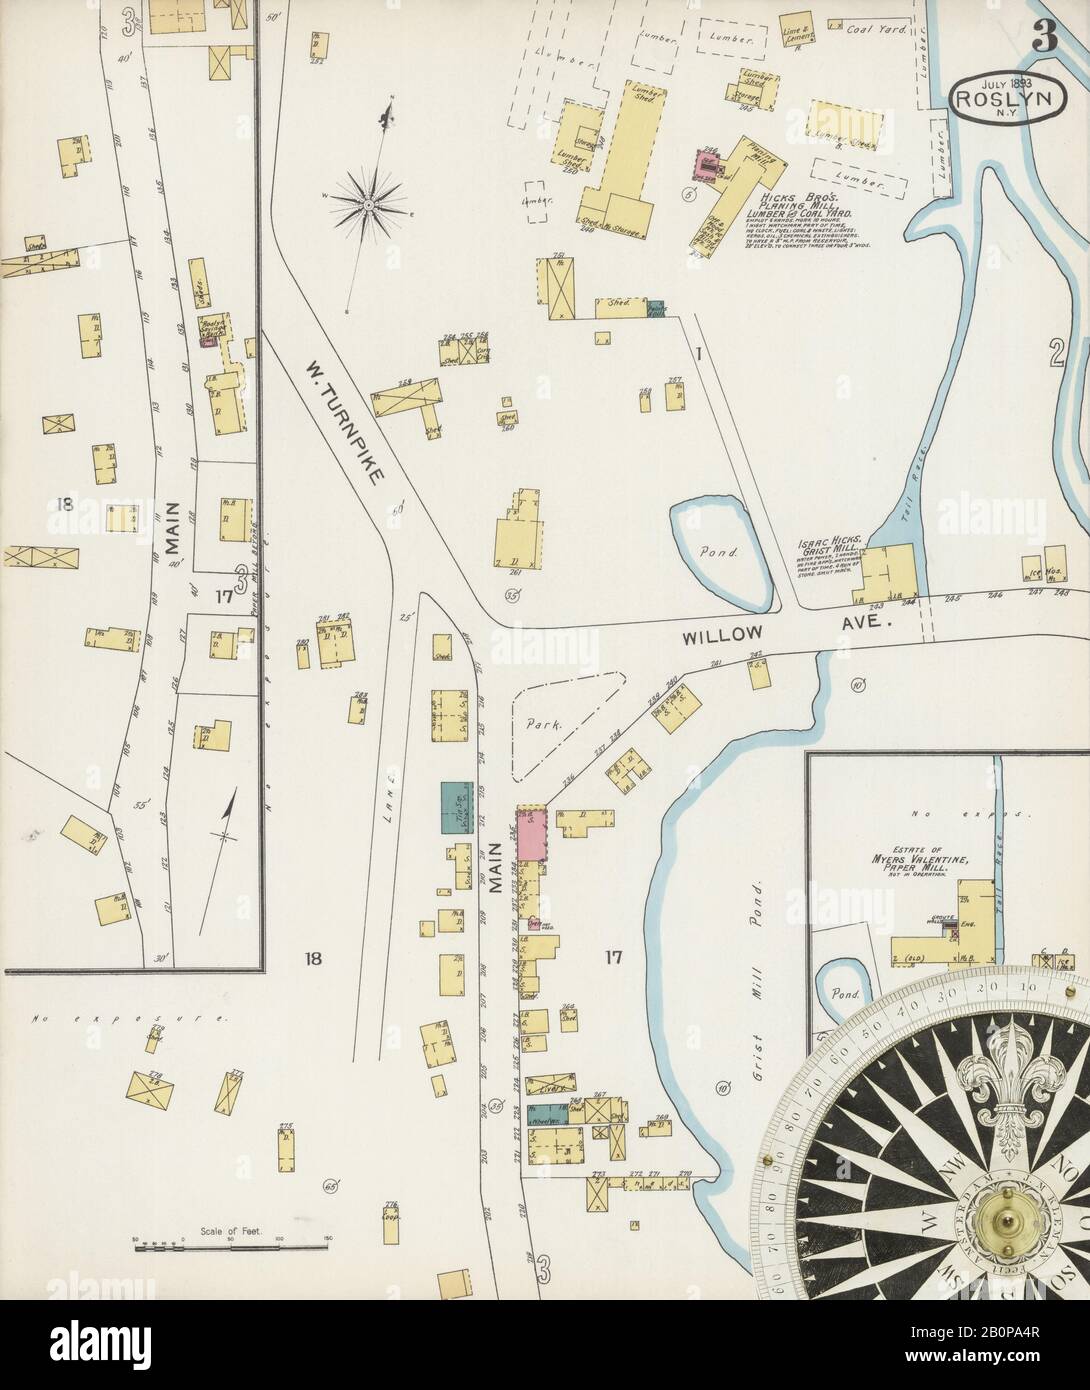 Image 3 of Sanborn Fire Insurance Map from Roslyn, Nassau County, New York. Jul 1893. 3 Sheet(s), America, street map with a Nineteenth Century compass Stock Photo